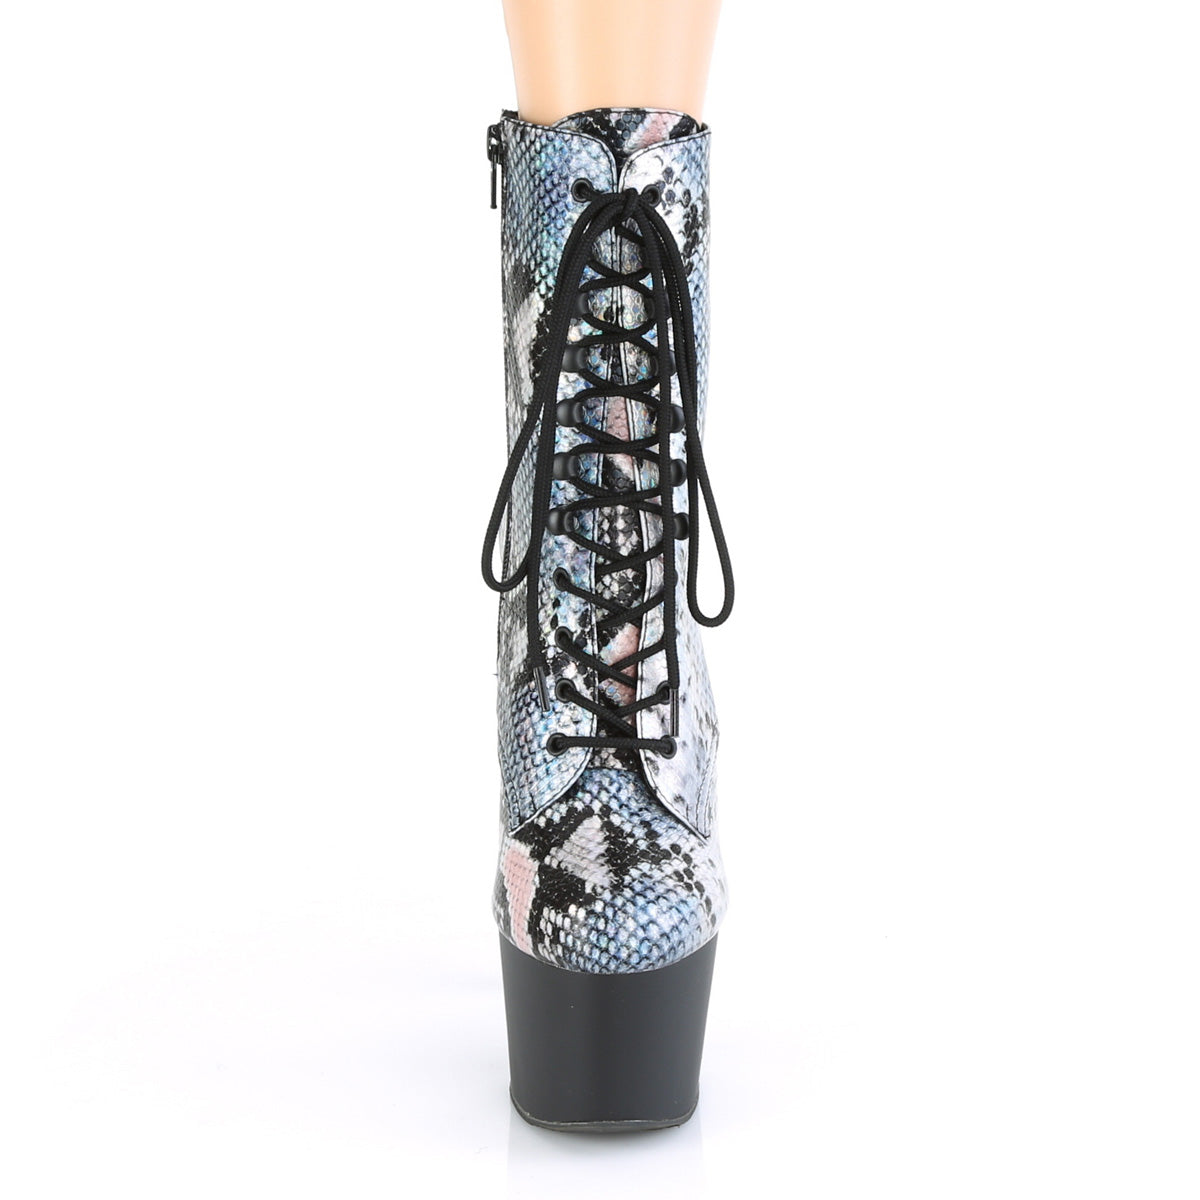 Pleaser Womens Ankle Boots ADORE-1020SP Slv Holo Snake Print/Blk Matte